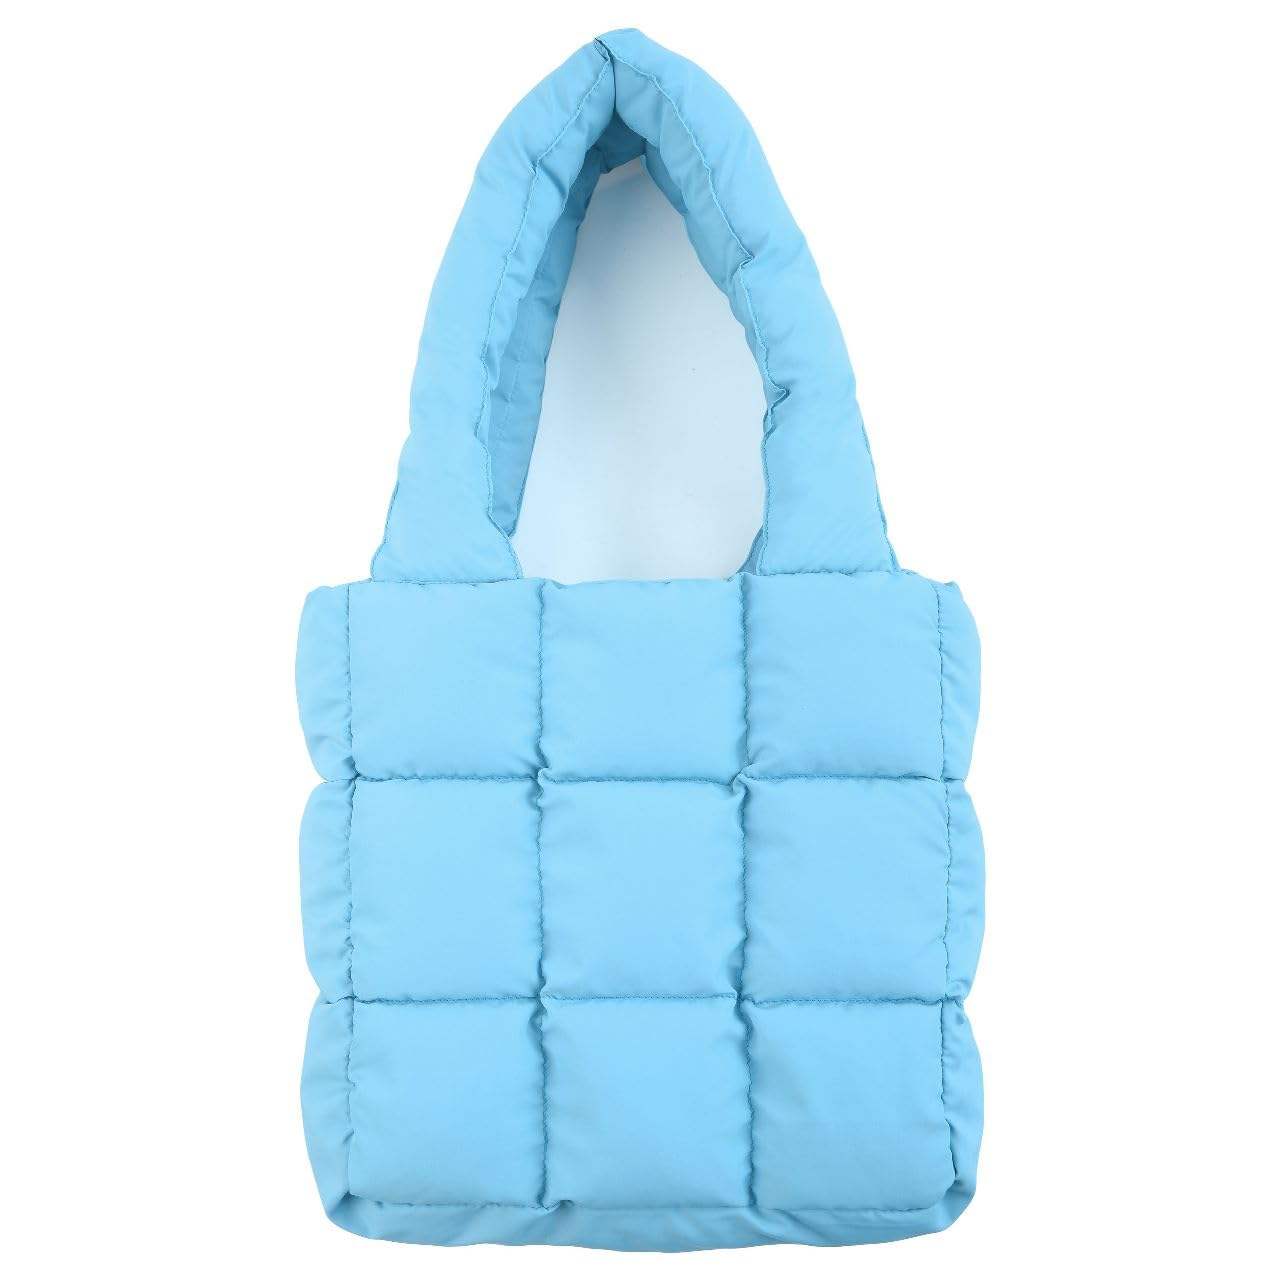 Quilted Tote Bag for Women Puffer Casual Handbag Lightweight Quilted Padding Shoulder Bag Cotton Padded Hand Carry Bag